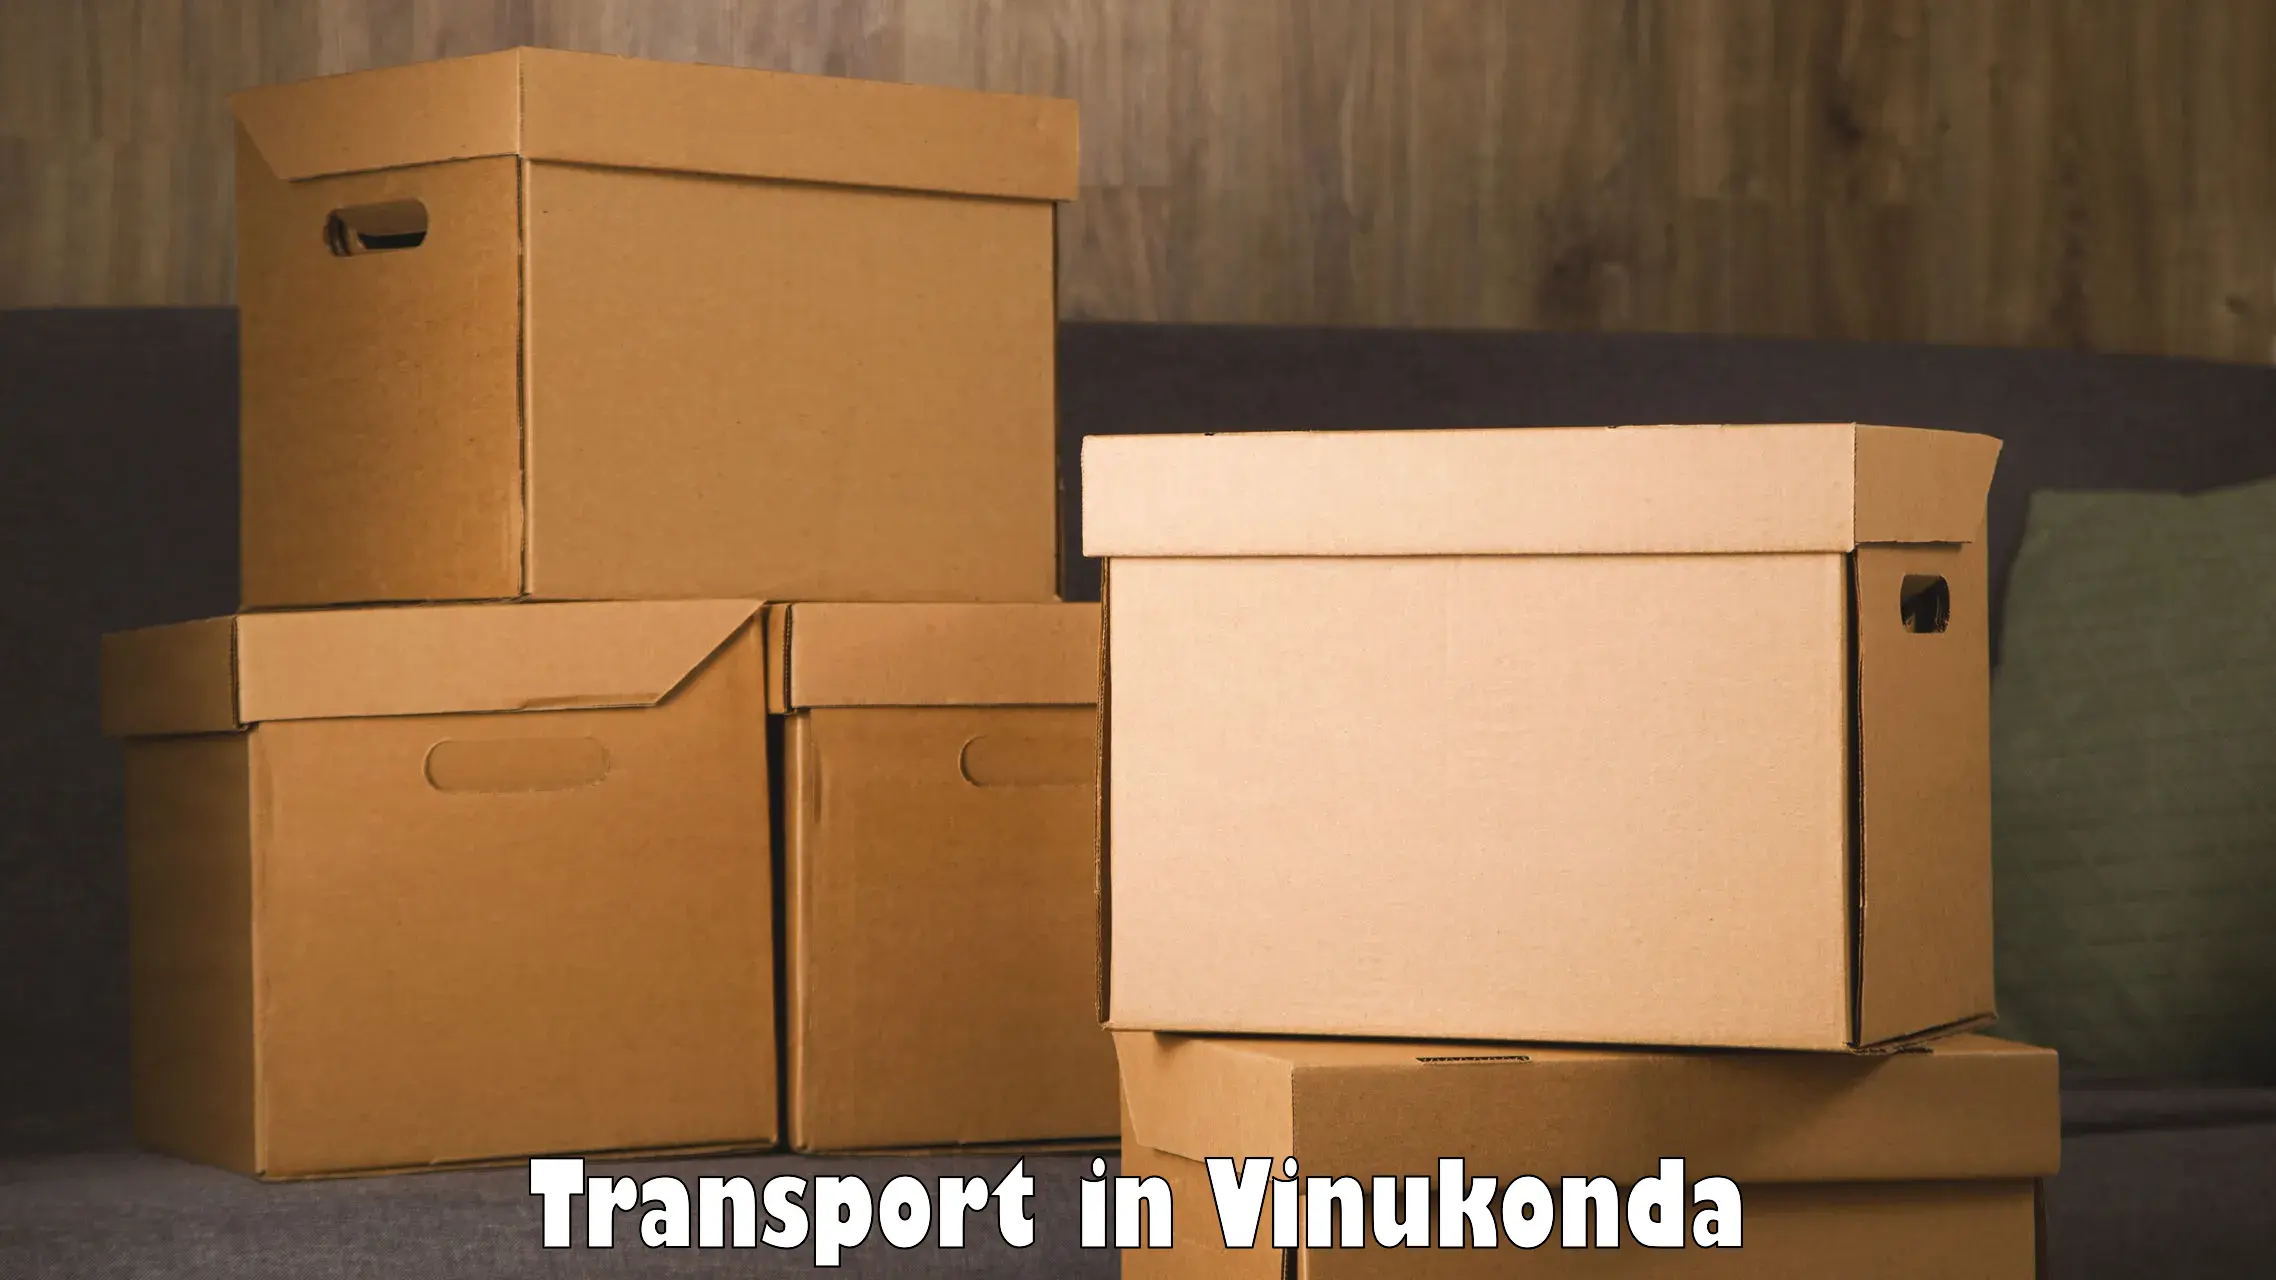 Transport bike from one state to another in Vinukonda